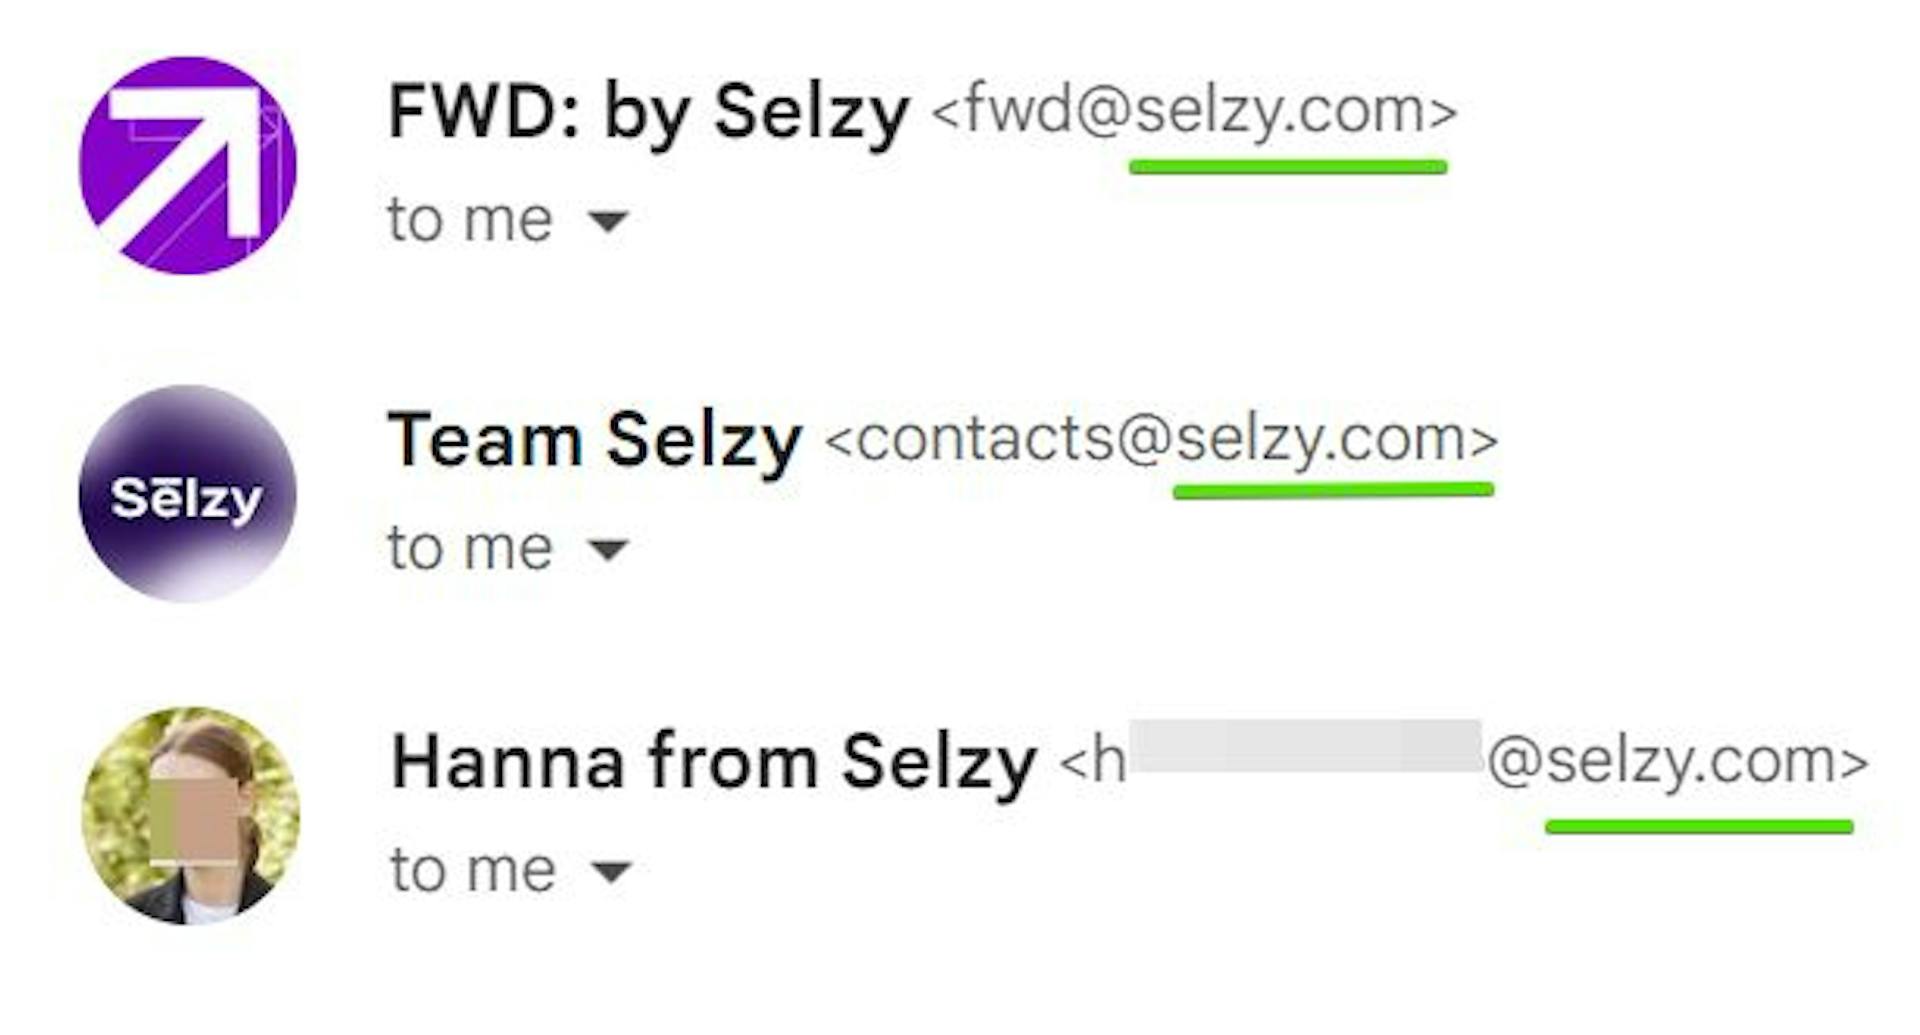 Selzy has a blog digest and a newsletter with product updates for users. These emails, including work emails from the team members, come from the same selzy.com domain but each type has a different avatar.